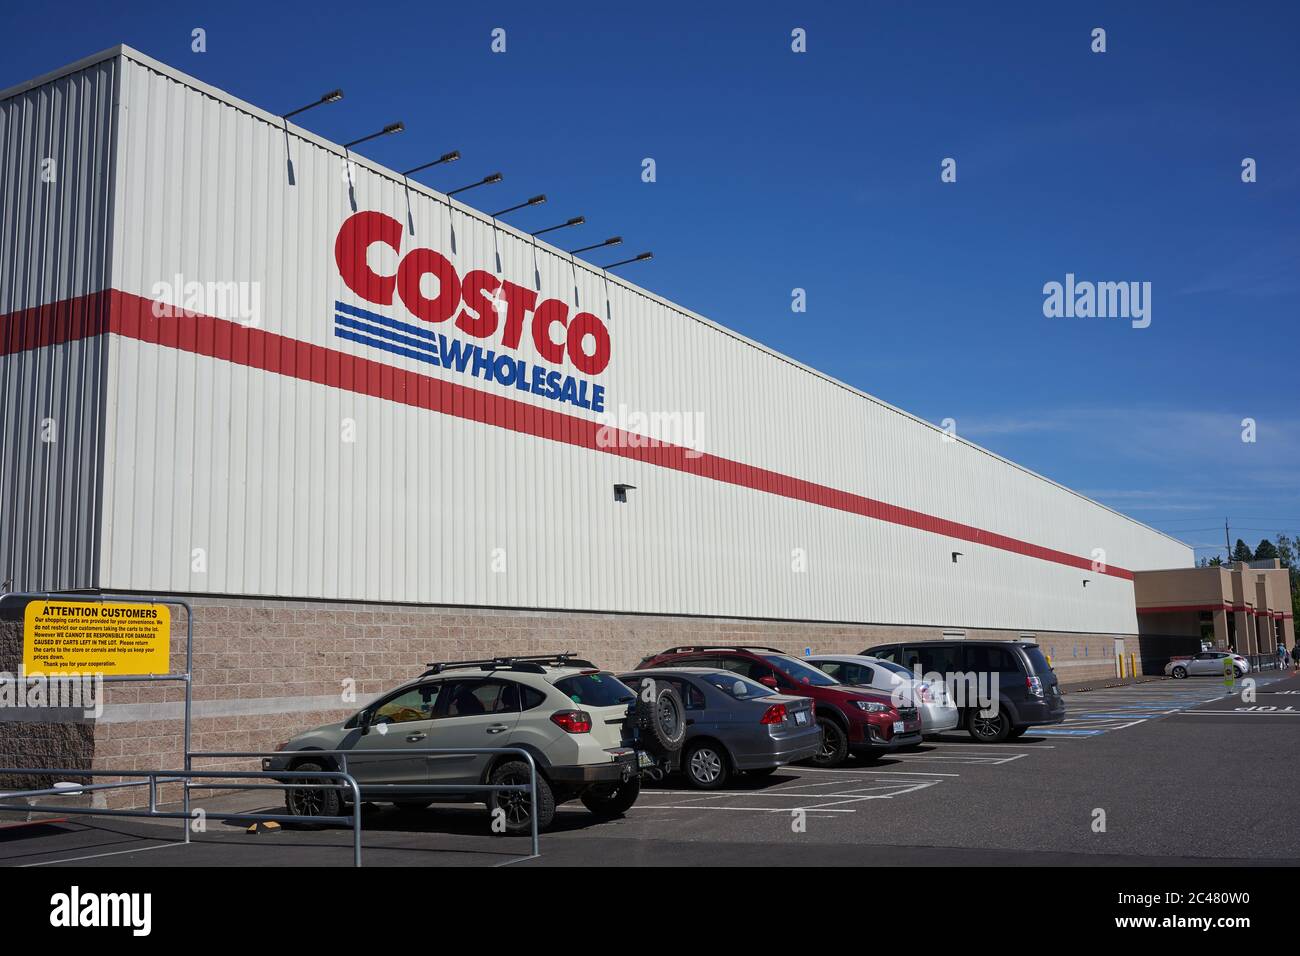 The Costco Wholesale store in Tigard, Oregon, seen on Tuesday, June 23, 2020. Stock Photo